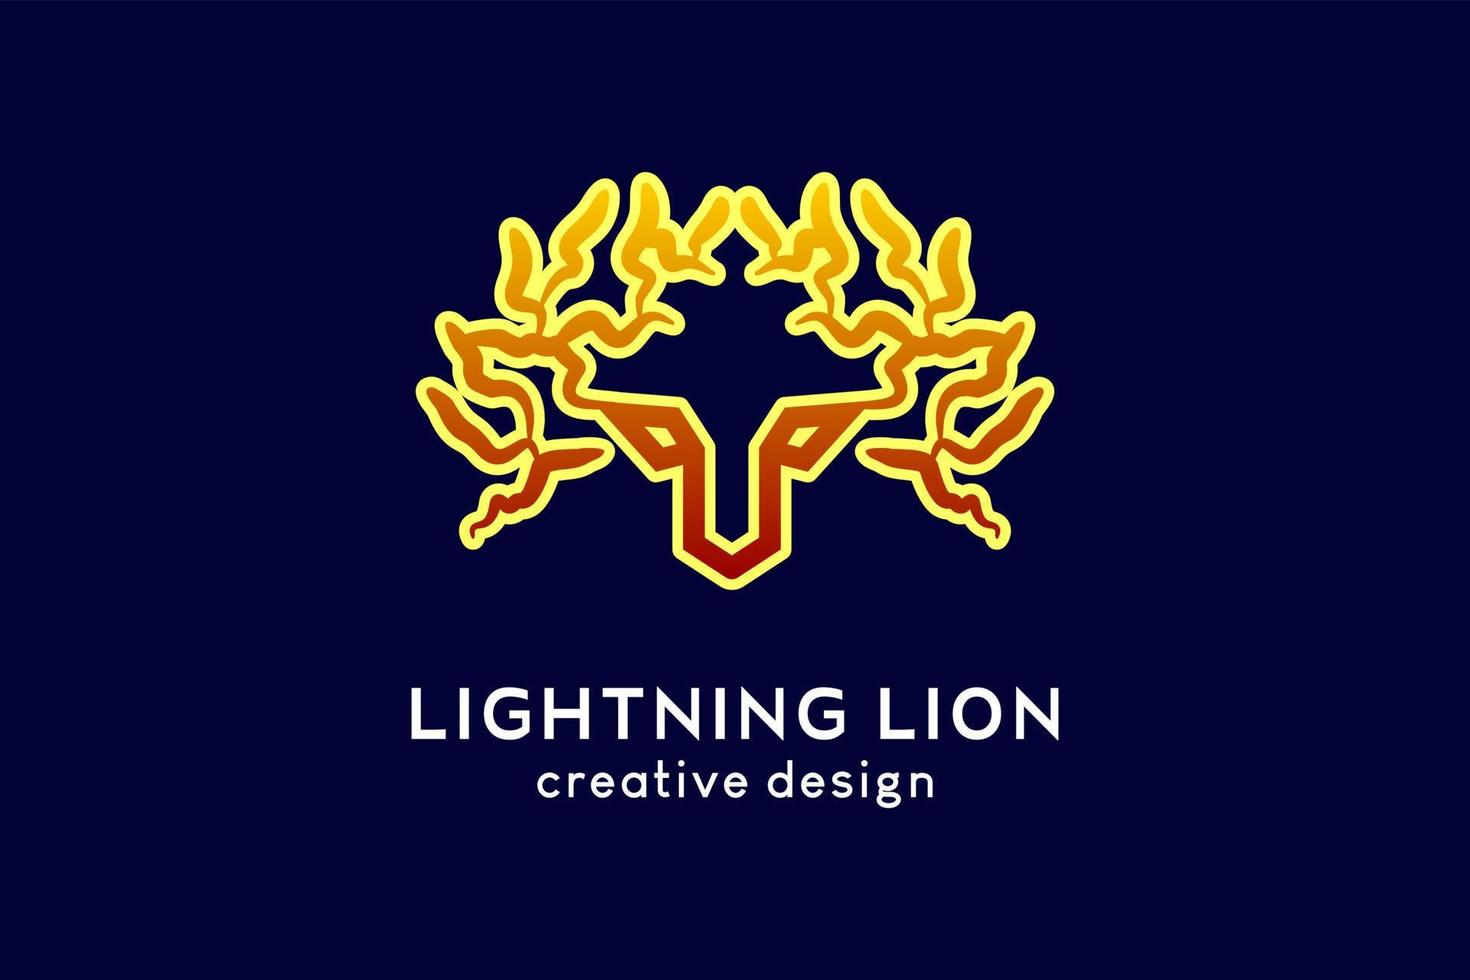 Lightning lion or lightning tiger logo design, lightning icon combines with a lion or tiger face in a creative concept vector